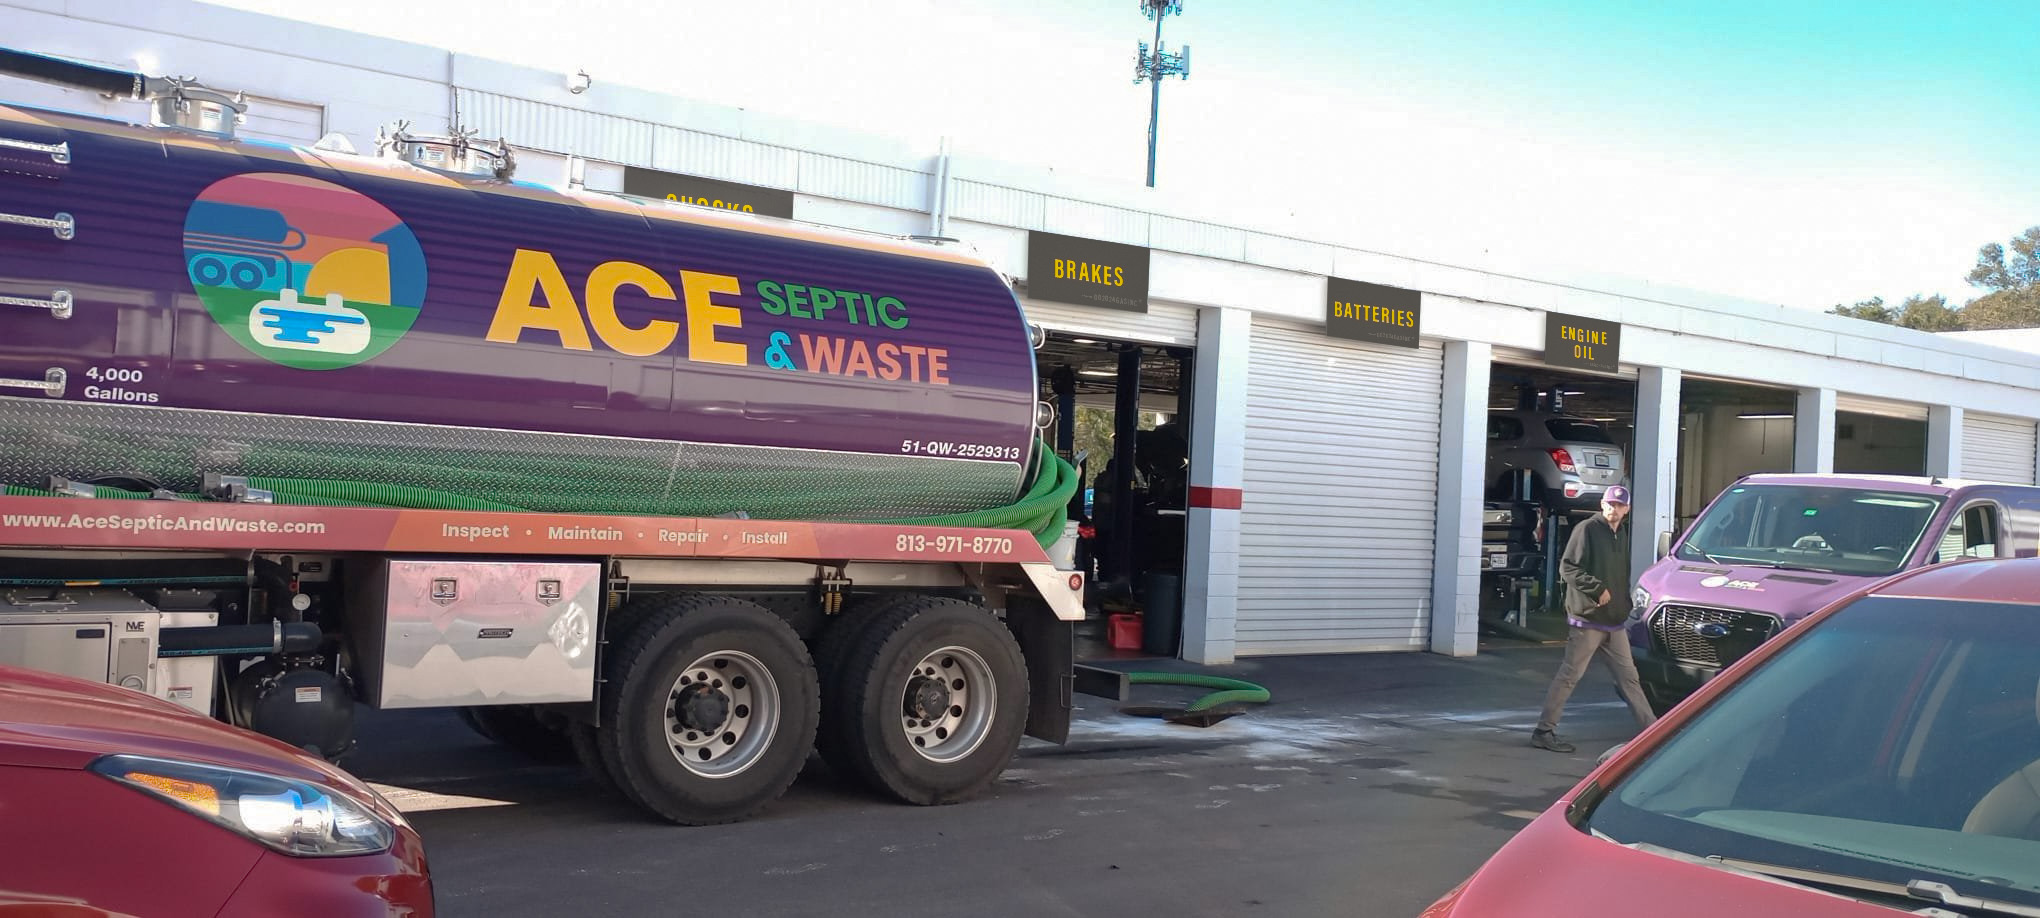 A septic truck with the ACE Septic & Waste logo servicing a mechanic shop.